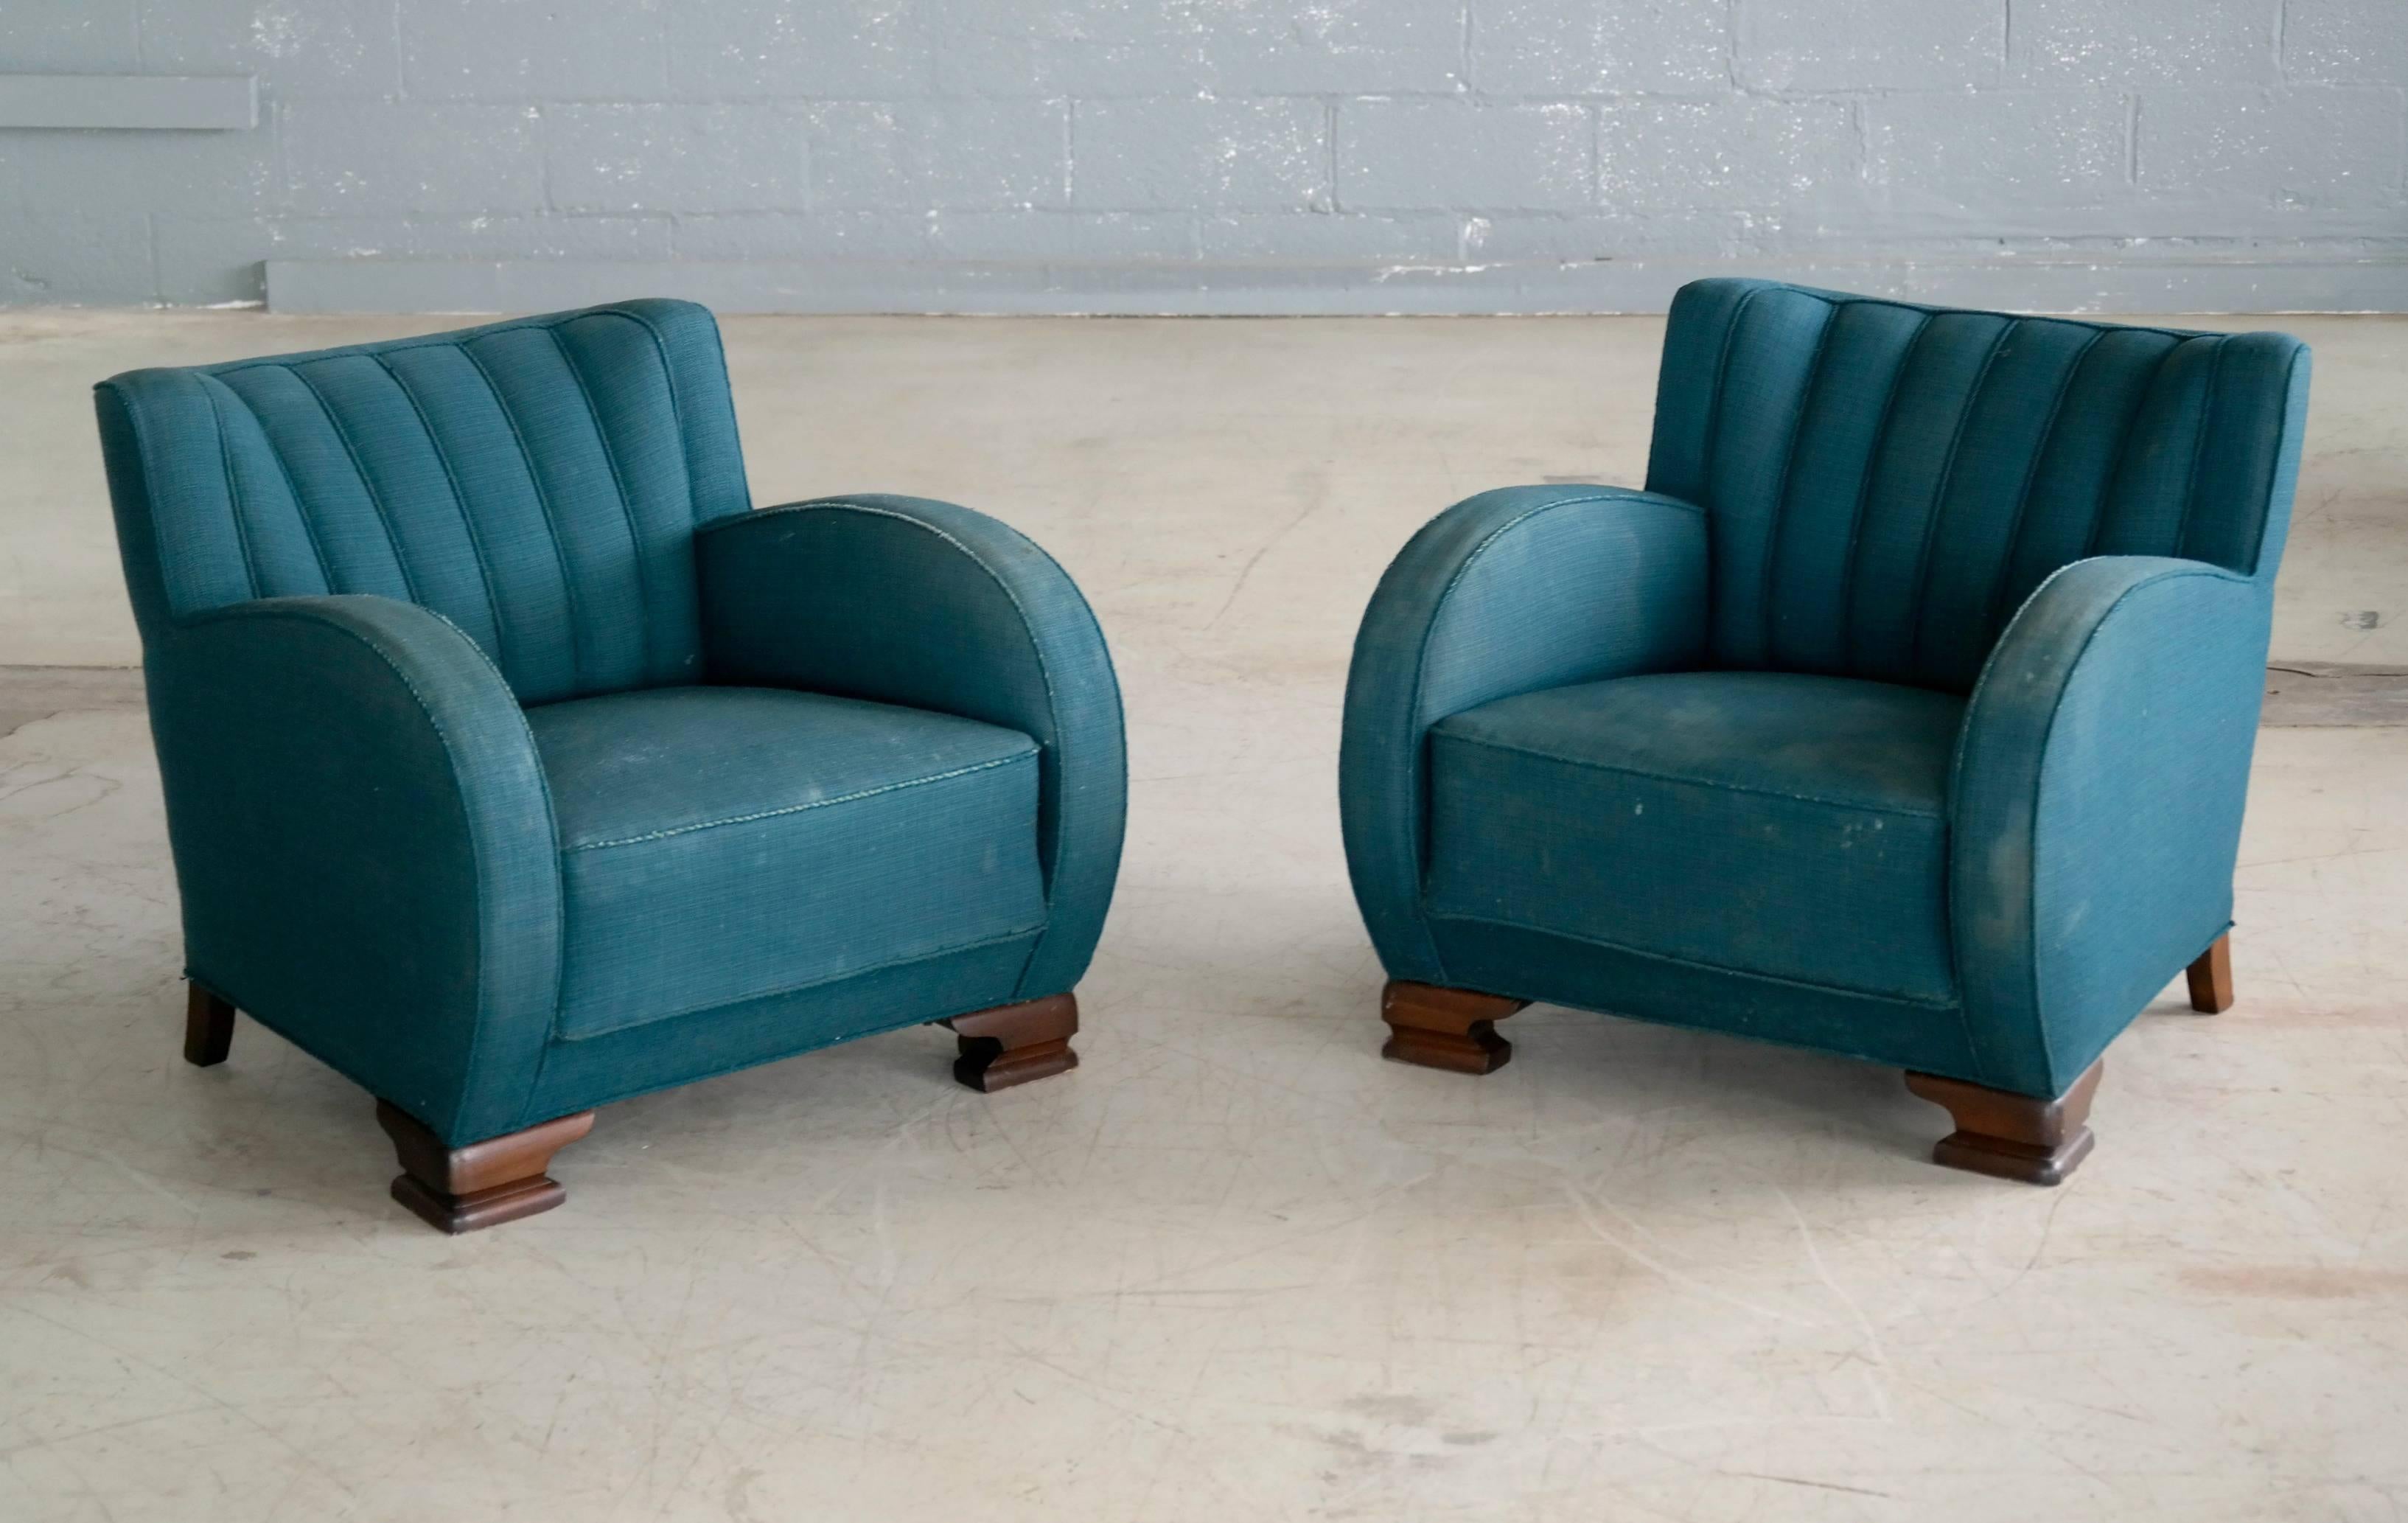 Exuberant, curvy and very eye-catching pair of Danish club chairs from the 1930s.
Set on block feet typical of the period and with a channeled back reminiscent of sports car seats of the era. Sturdy and sound construction but with significant wear